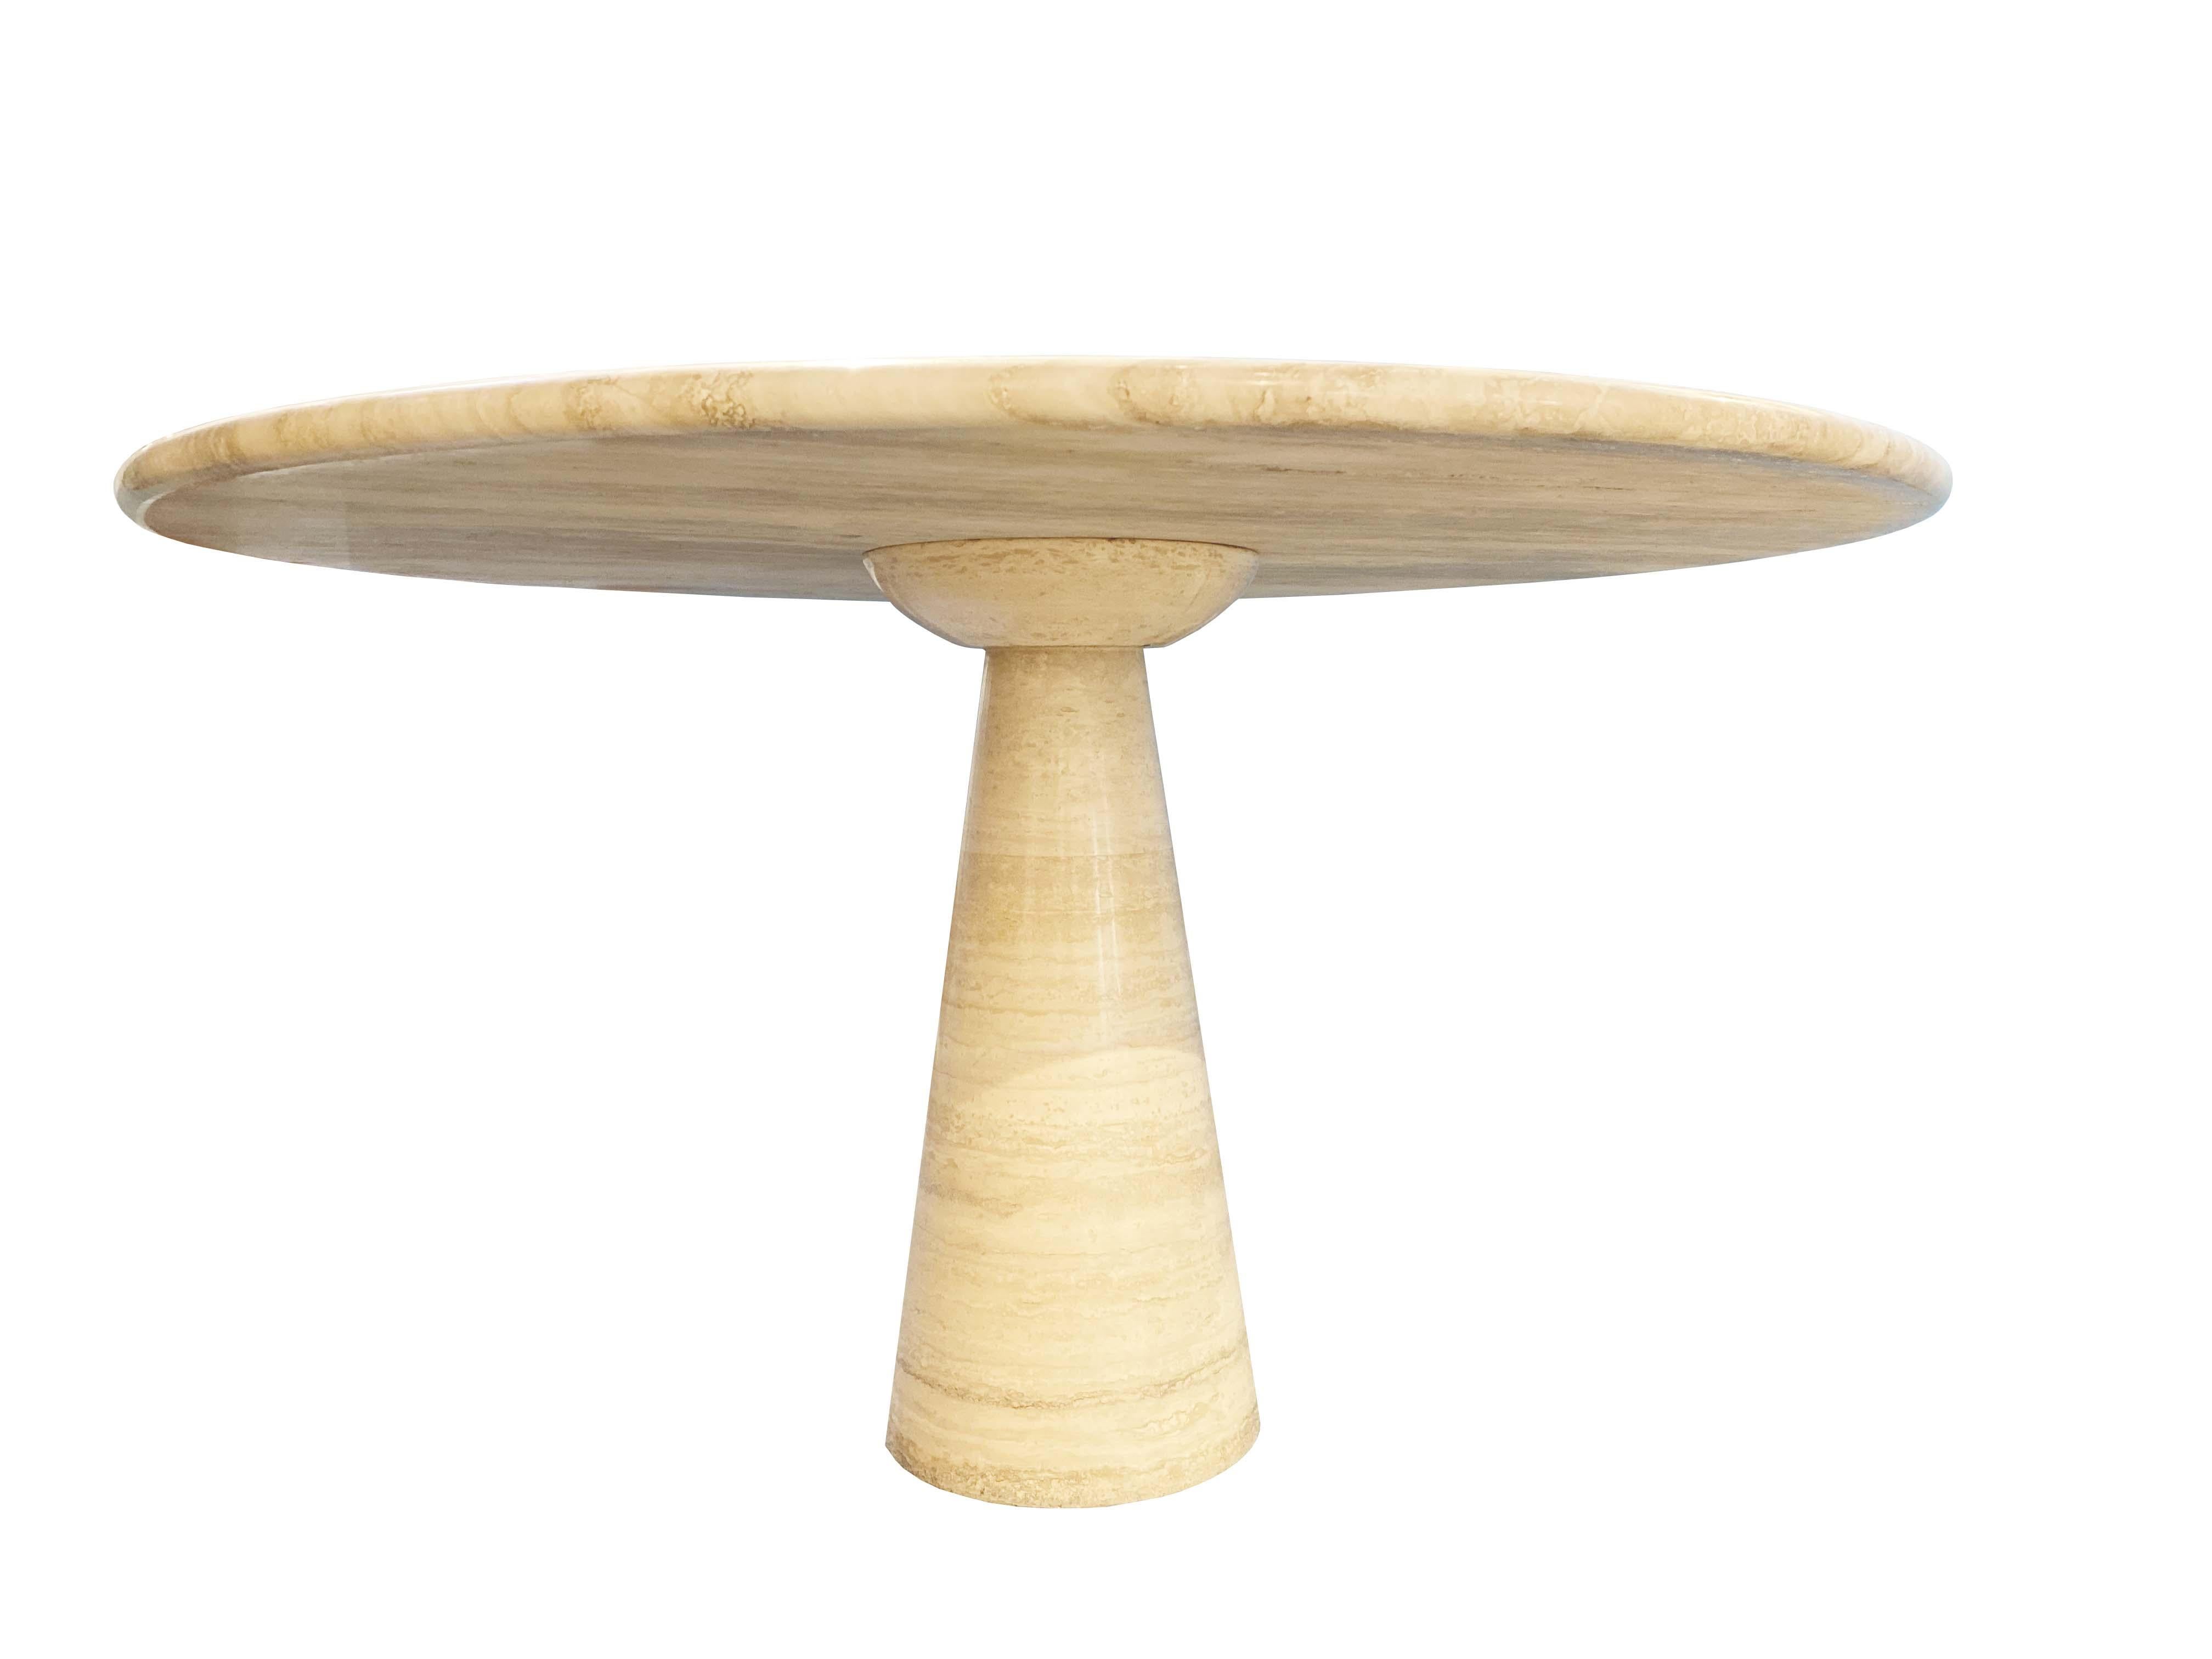 A round Italian travertine pedestal dining table, Italy, circa 1970s. 
Modern and minimalist design. Attributed to Angelo Mangiarotti. 

The marvel of this Italian table design is the top balances perfectly and securely by it's own weight.
Beautiful